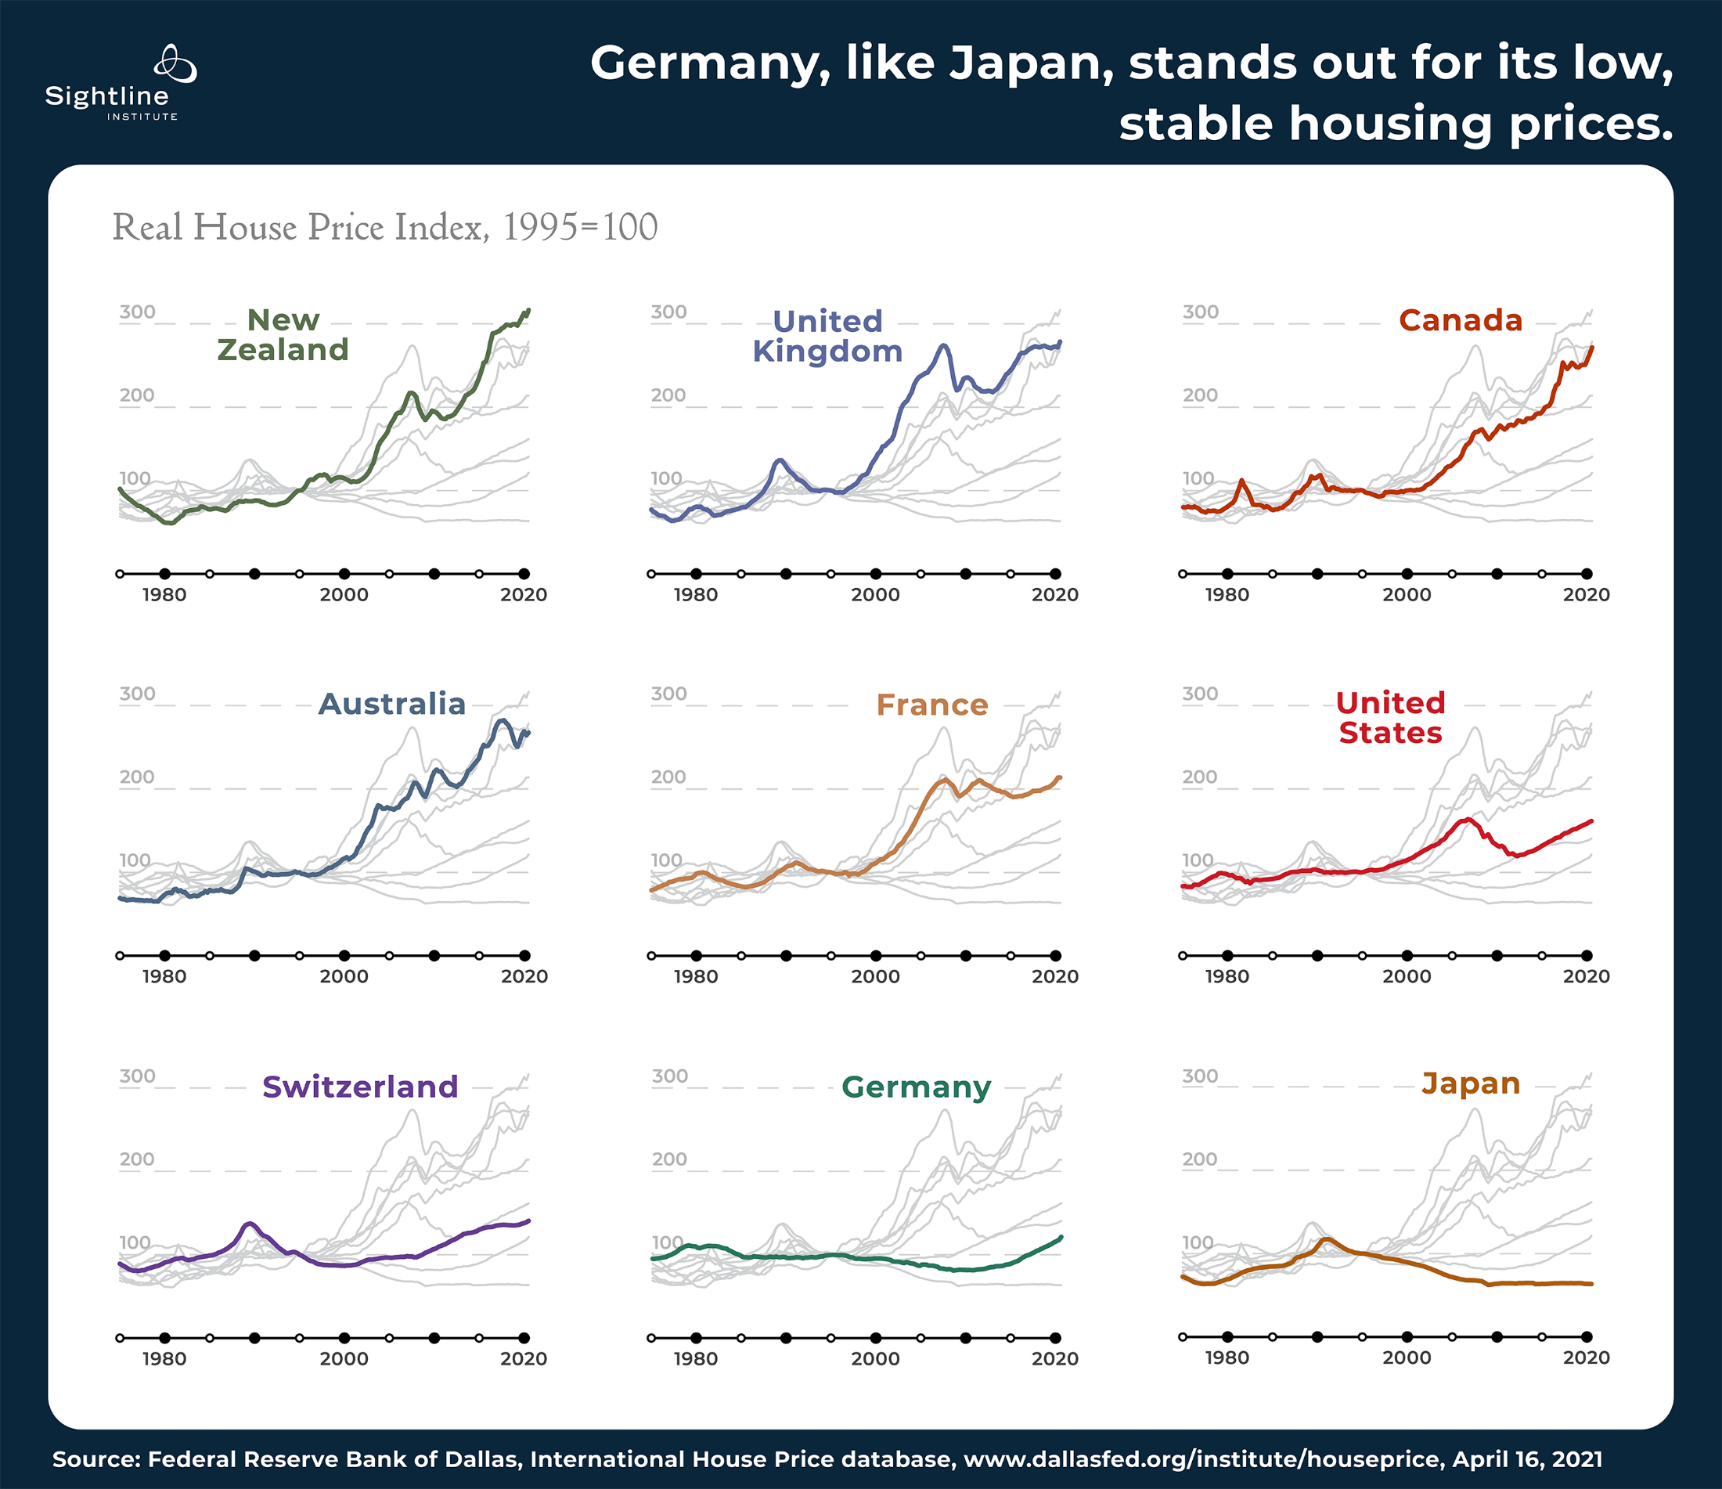 line charts of real house price index of nine different countries, demonstrating low, stable housing prices in Germany over time